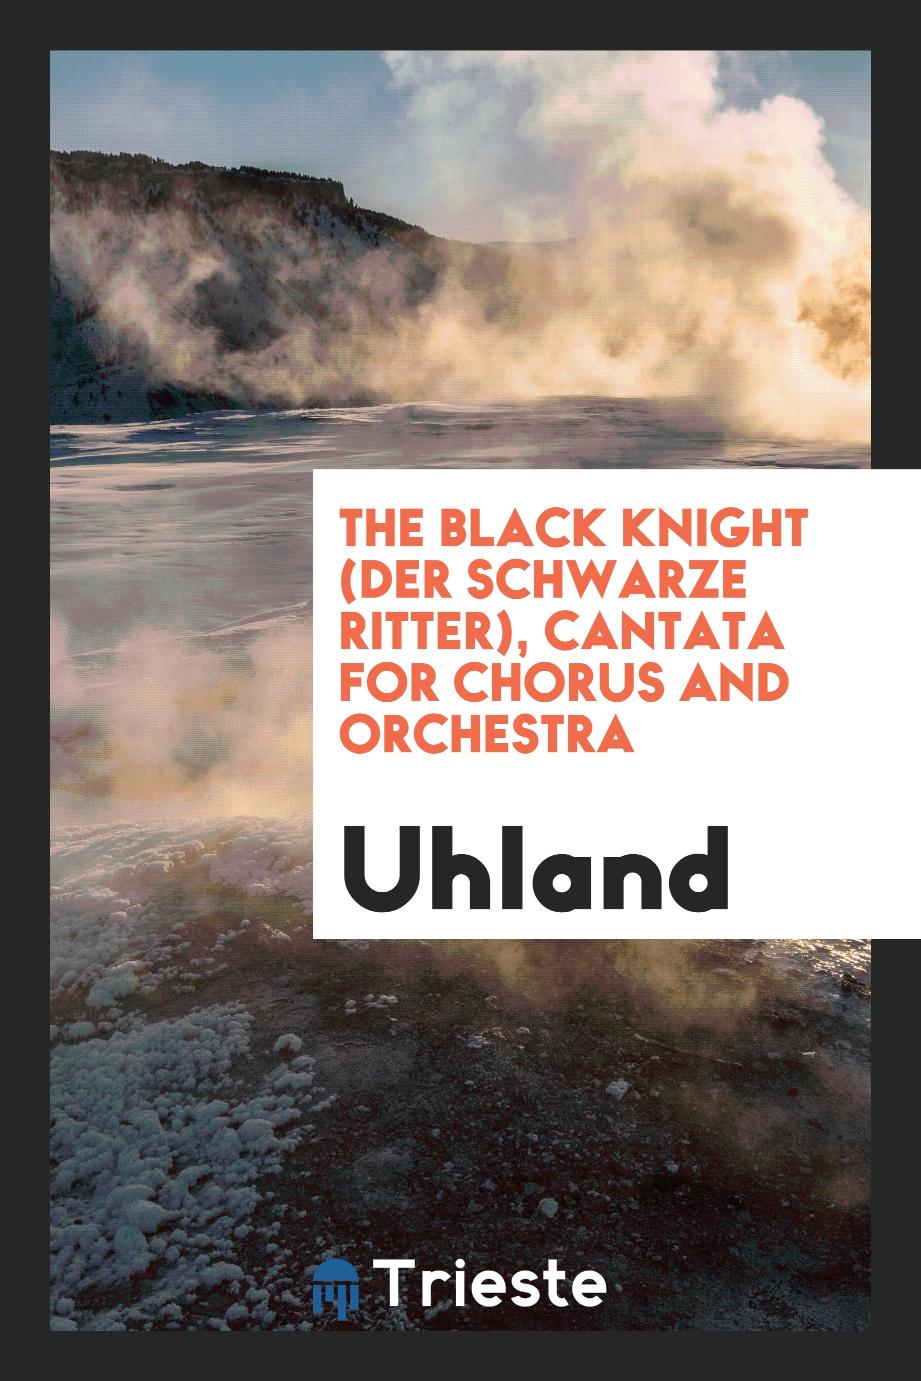 The Black Knight (Der Schwarze Ritter), Cantata for Chorus and Orchestra